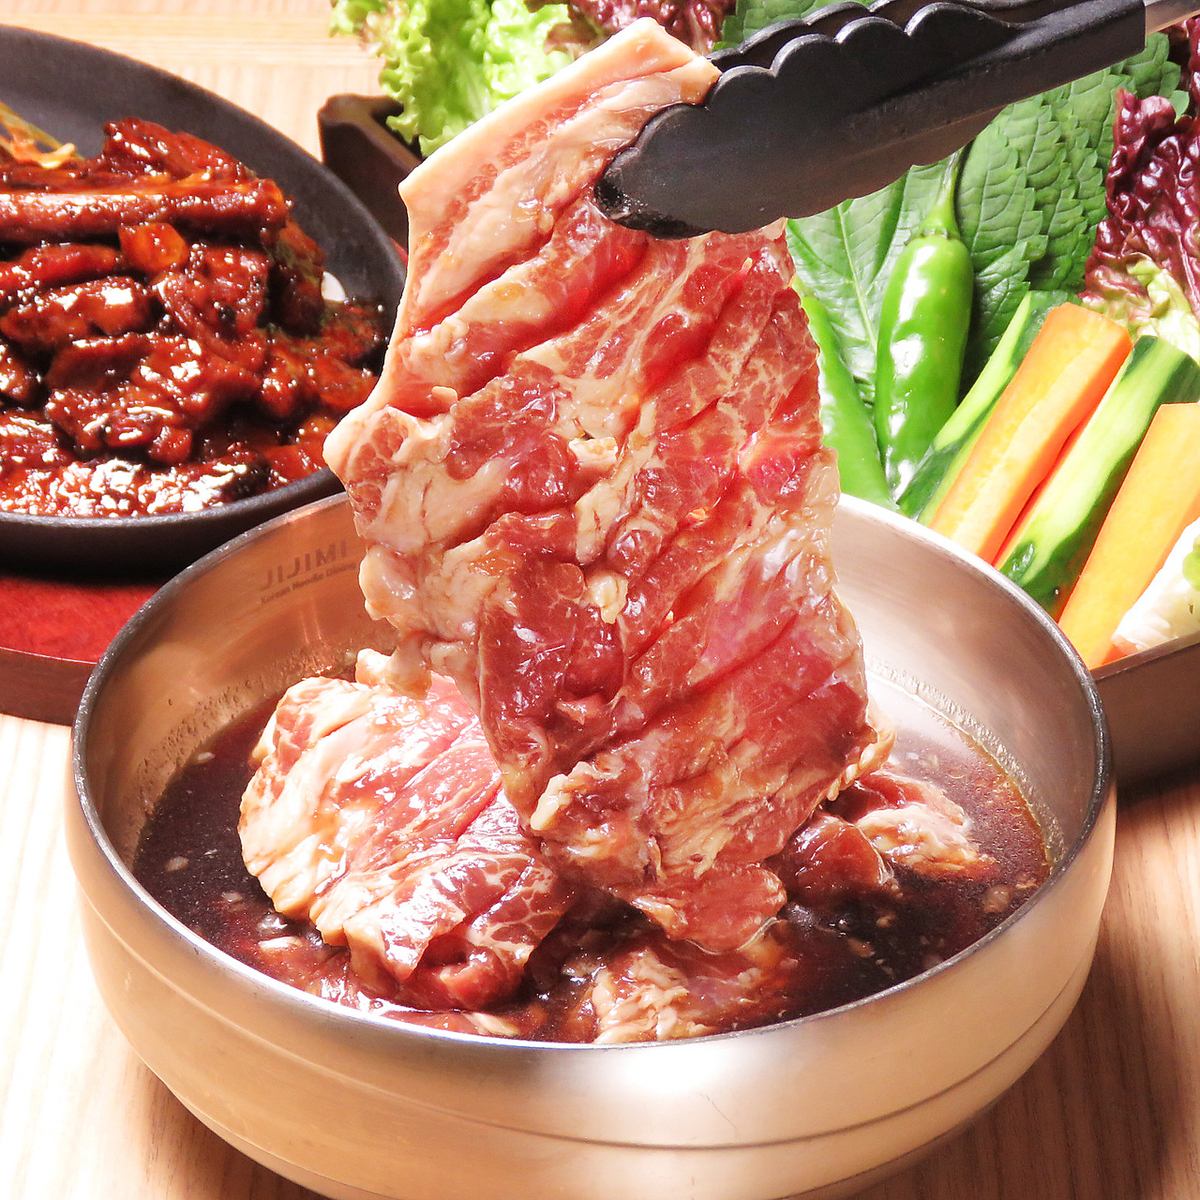 The Samgyeopsal all-you-can-eat course is 3850 yen including tax with all-you-can-drink for 2 hours!